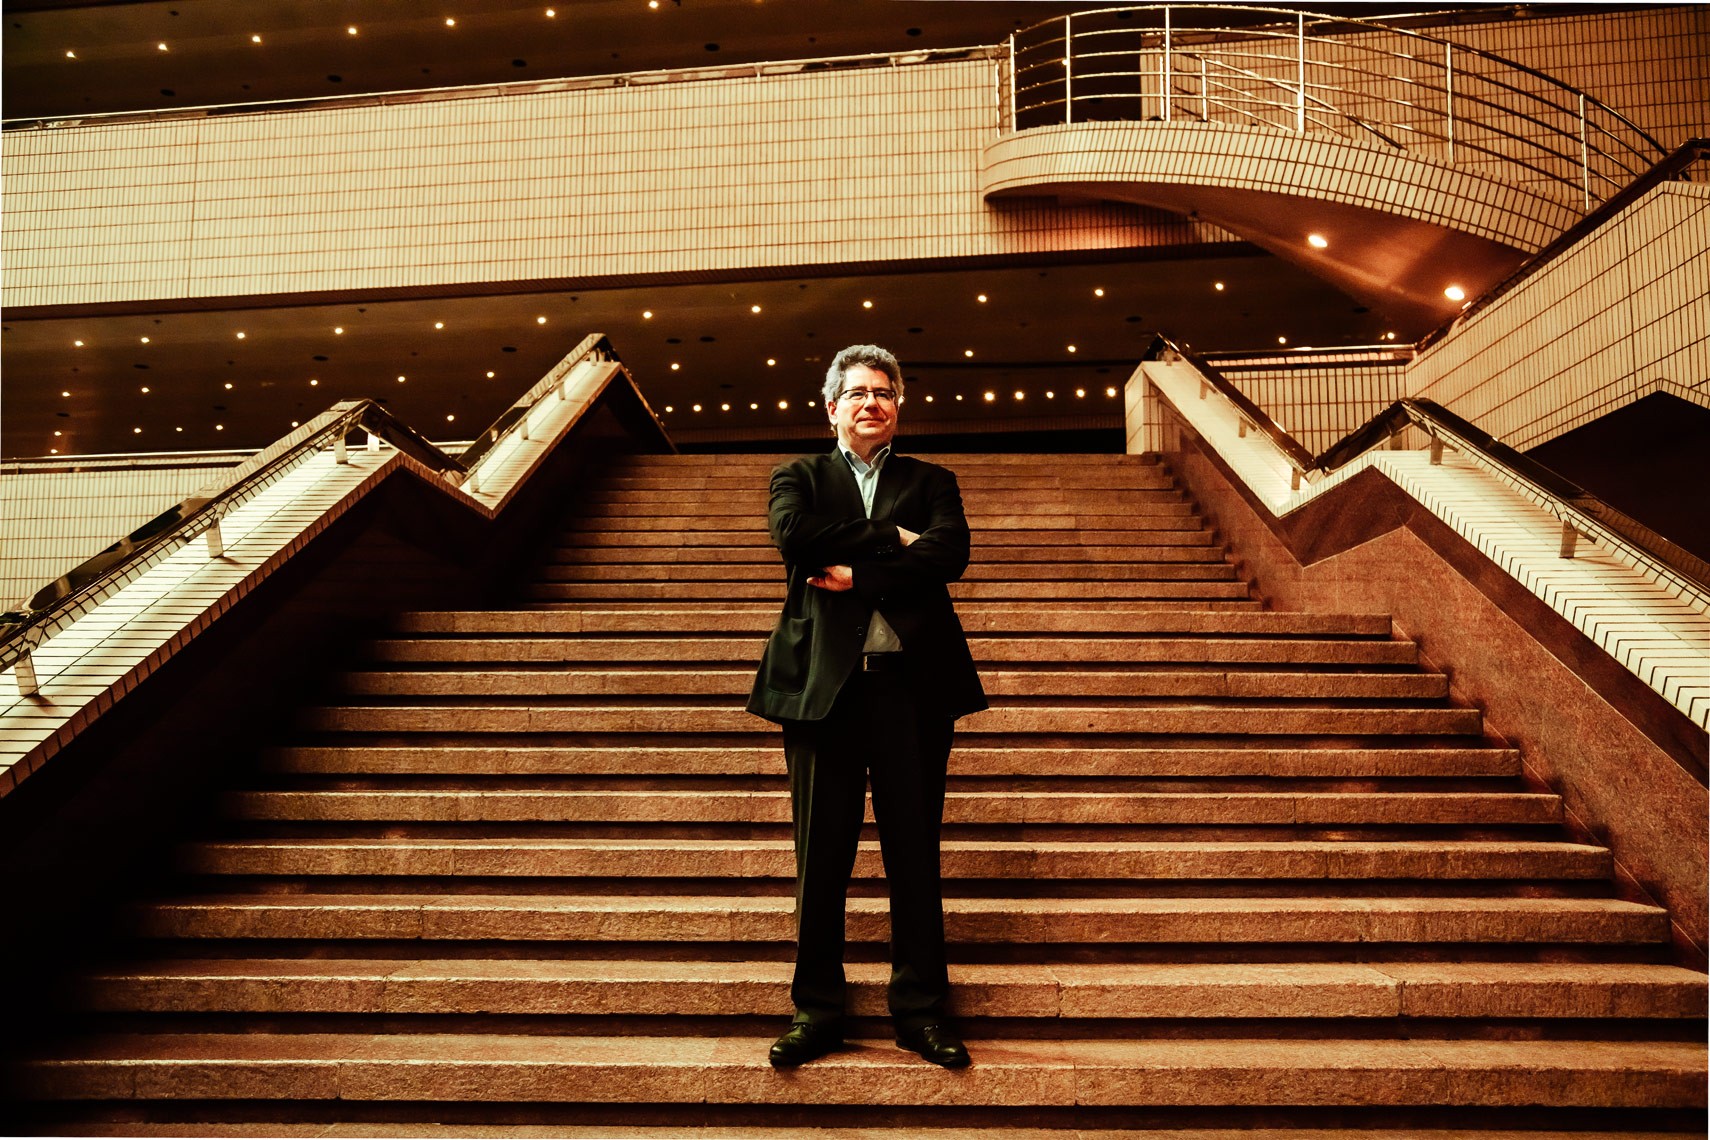 Benedikt Fohr, the new chief executive of the Hong Kong Philharmonic Orchestra, says he is keen to discover ‘what the orchestra wants [and] what the public in Hong Kong wants’. Photo: Akif Hakan Celebi